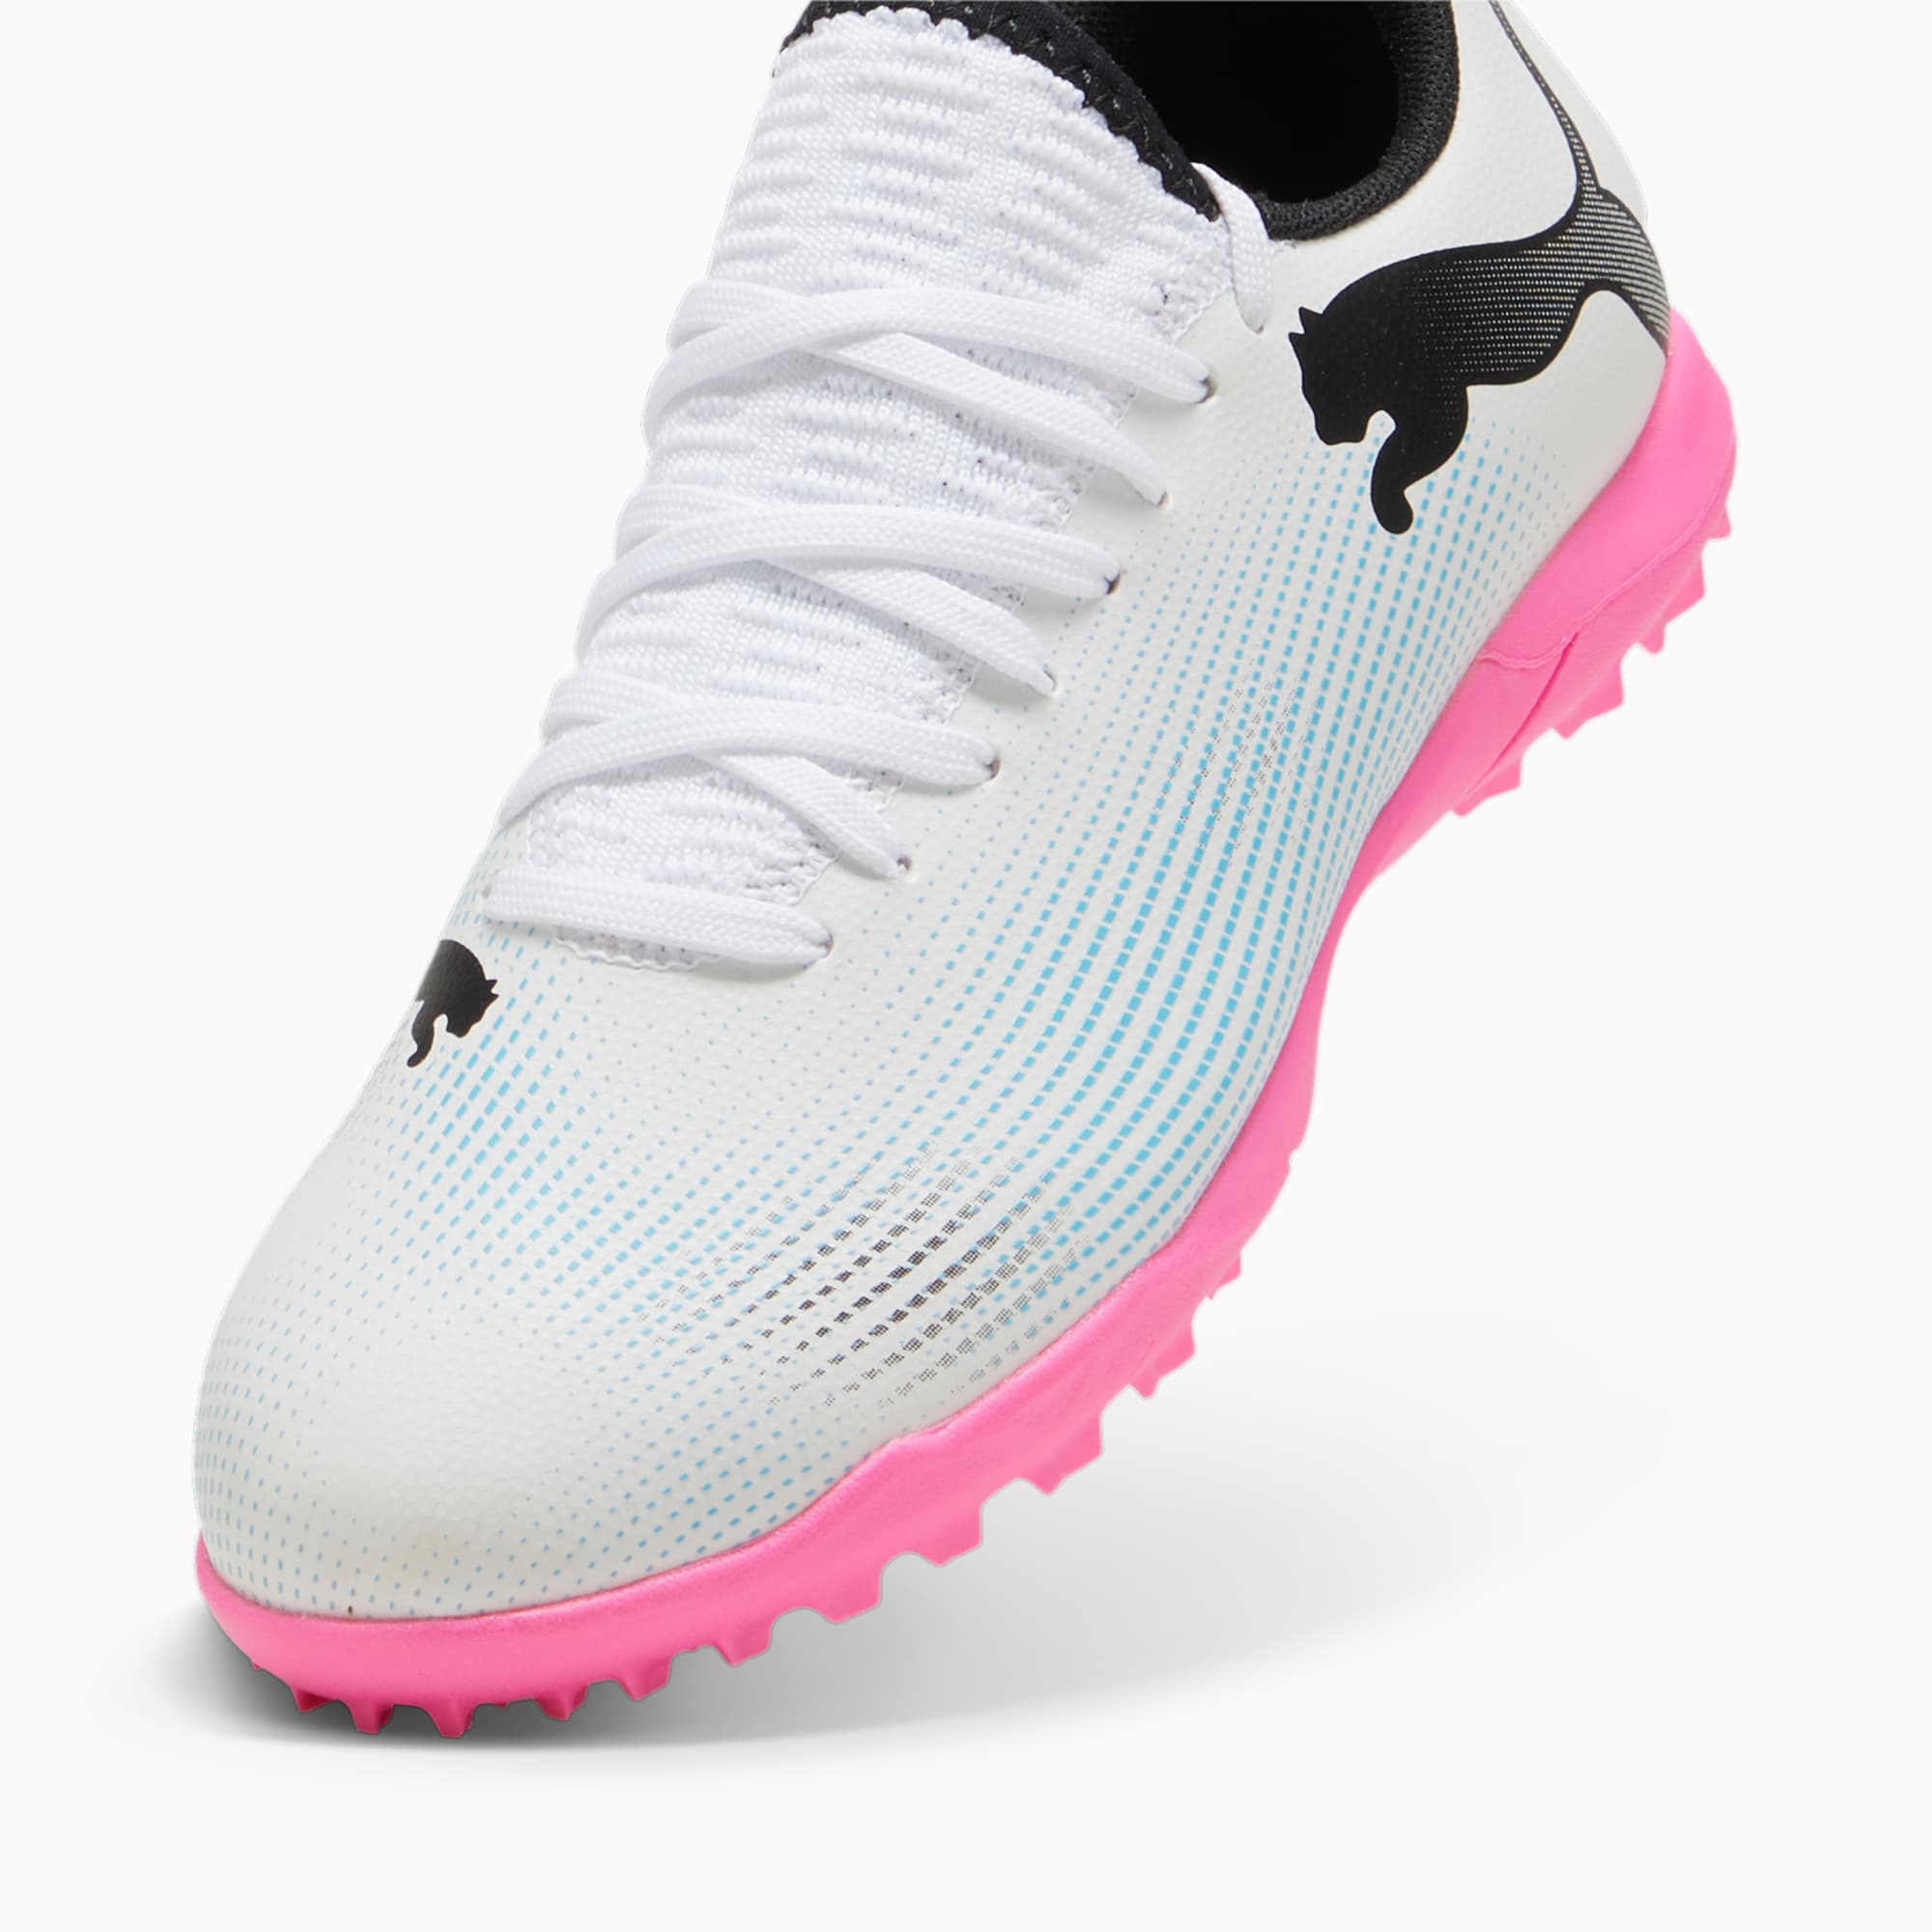 PUMA Future 7 Play TT Youth Football Boots, White/Black/Poison Pink